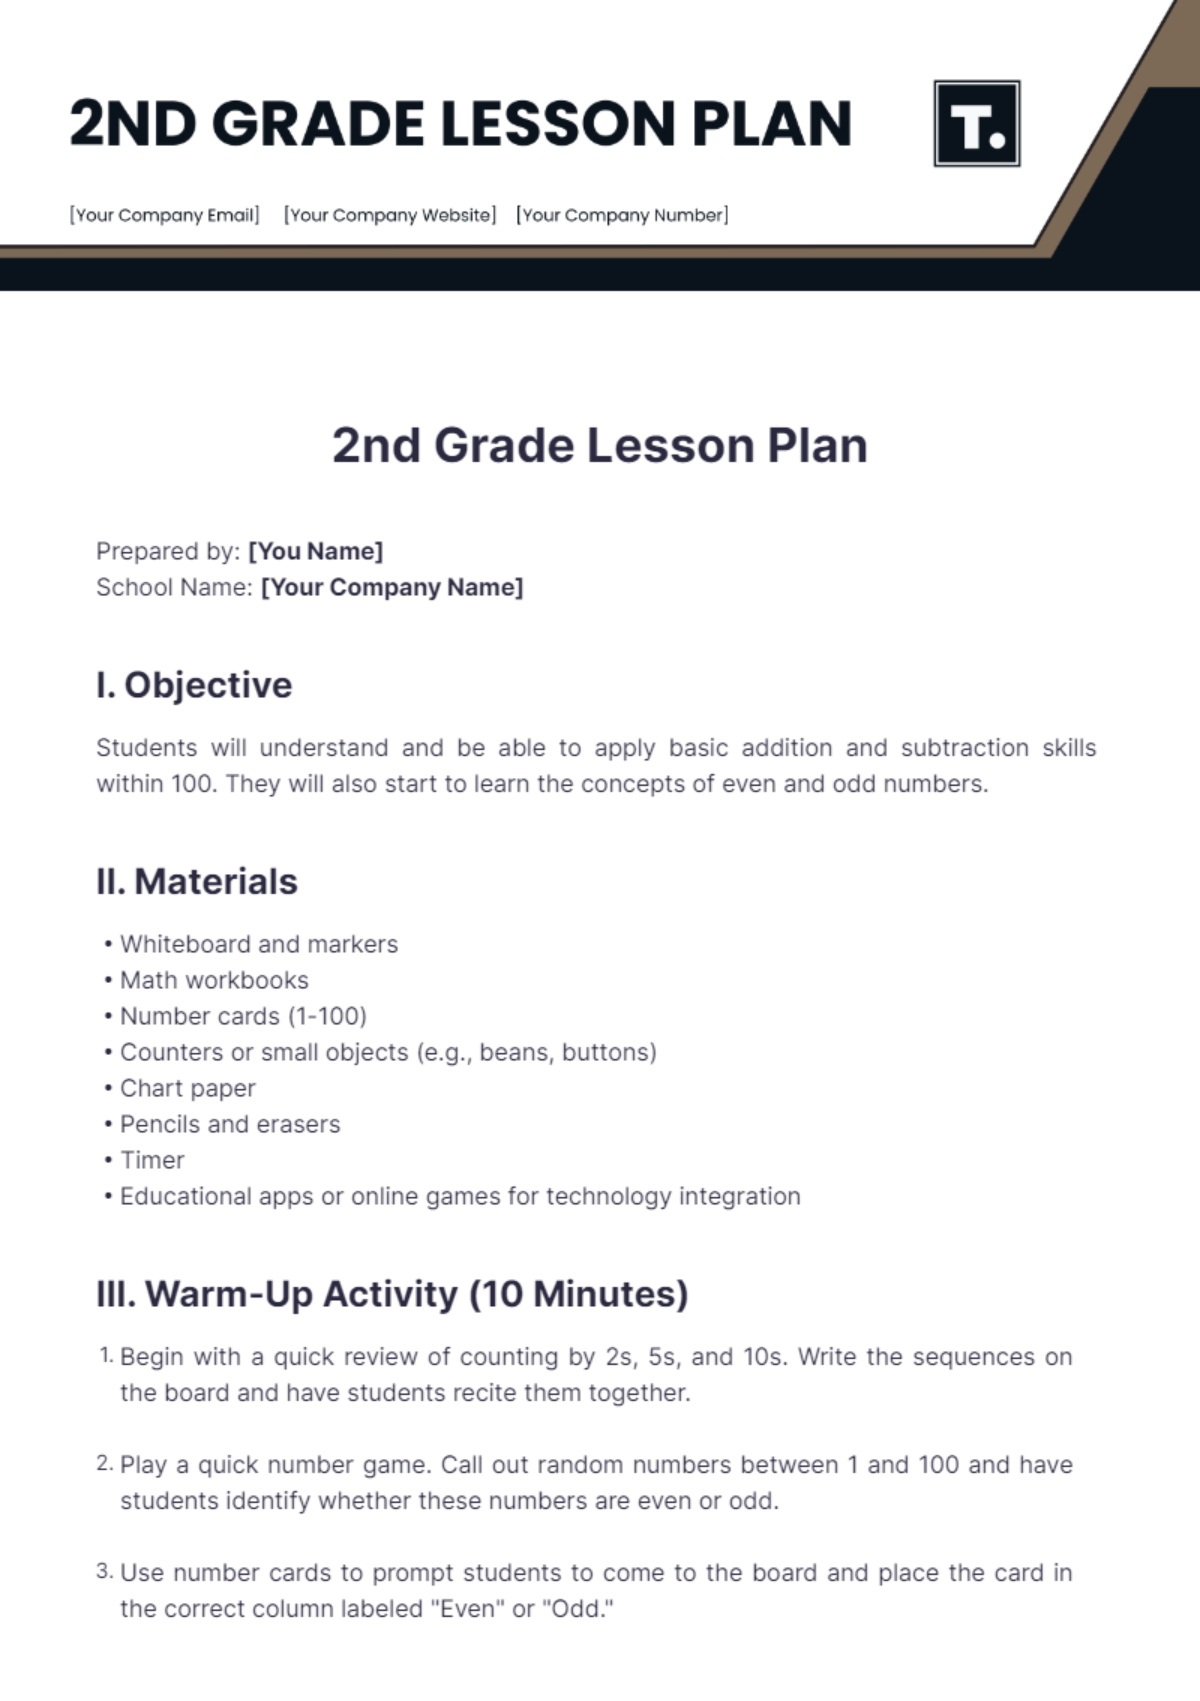 Free 2nd Grade Lesson Plan Template